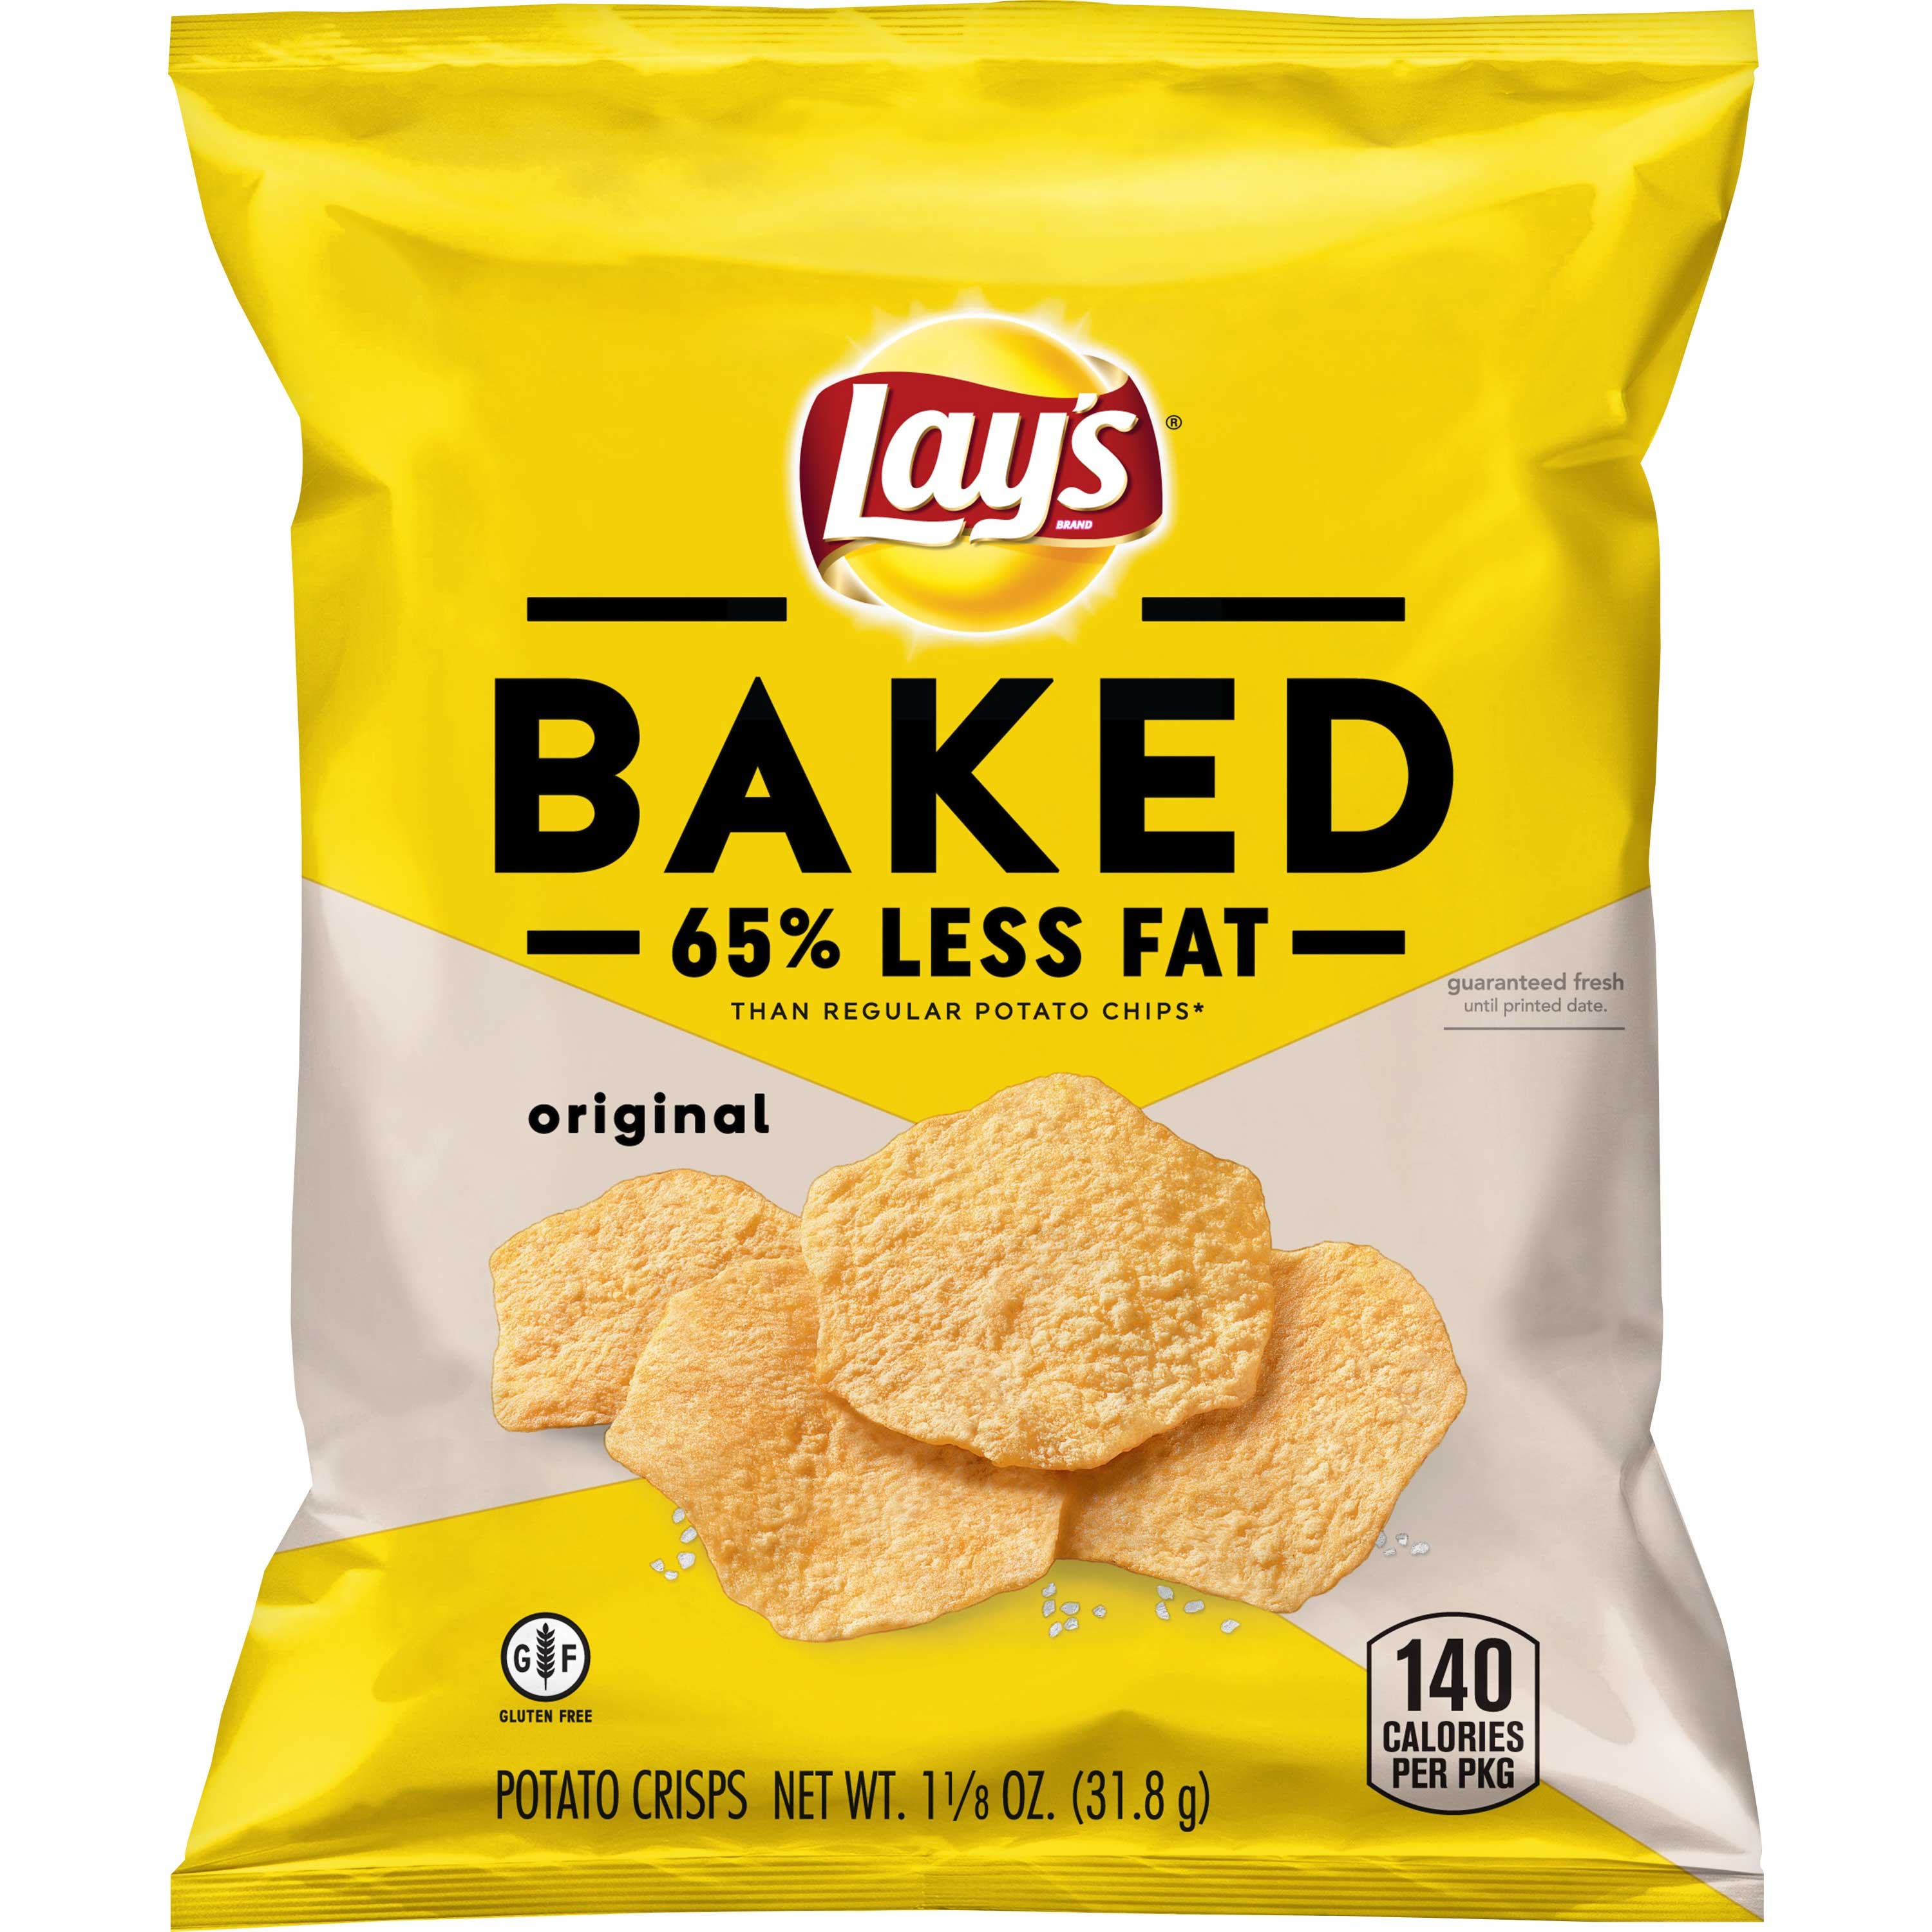 Lays Oven Baked Potato Chips Case